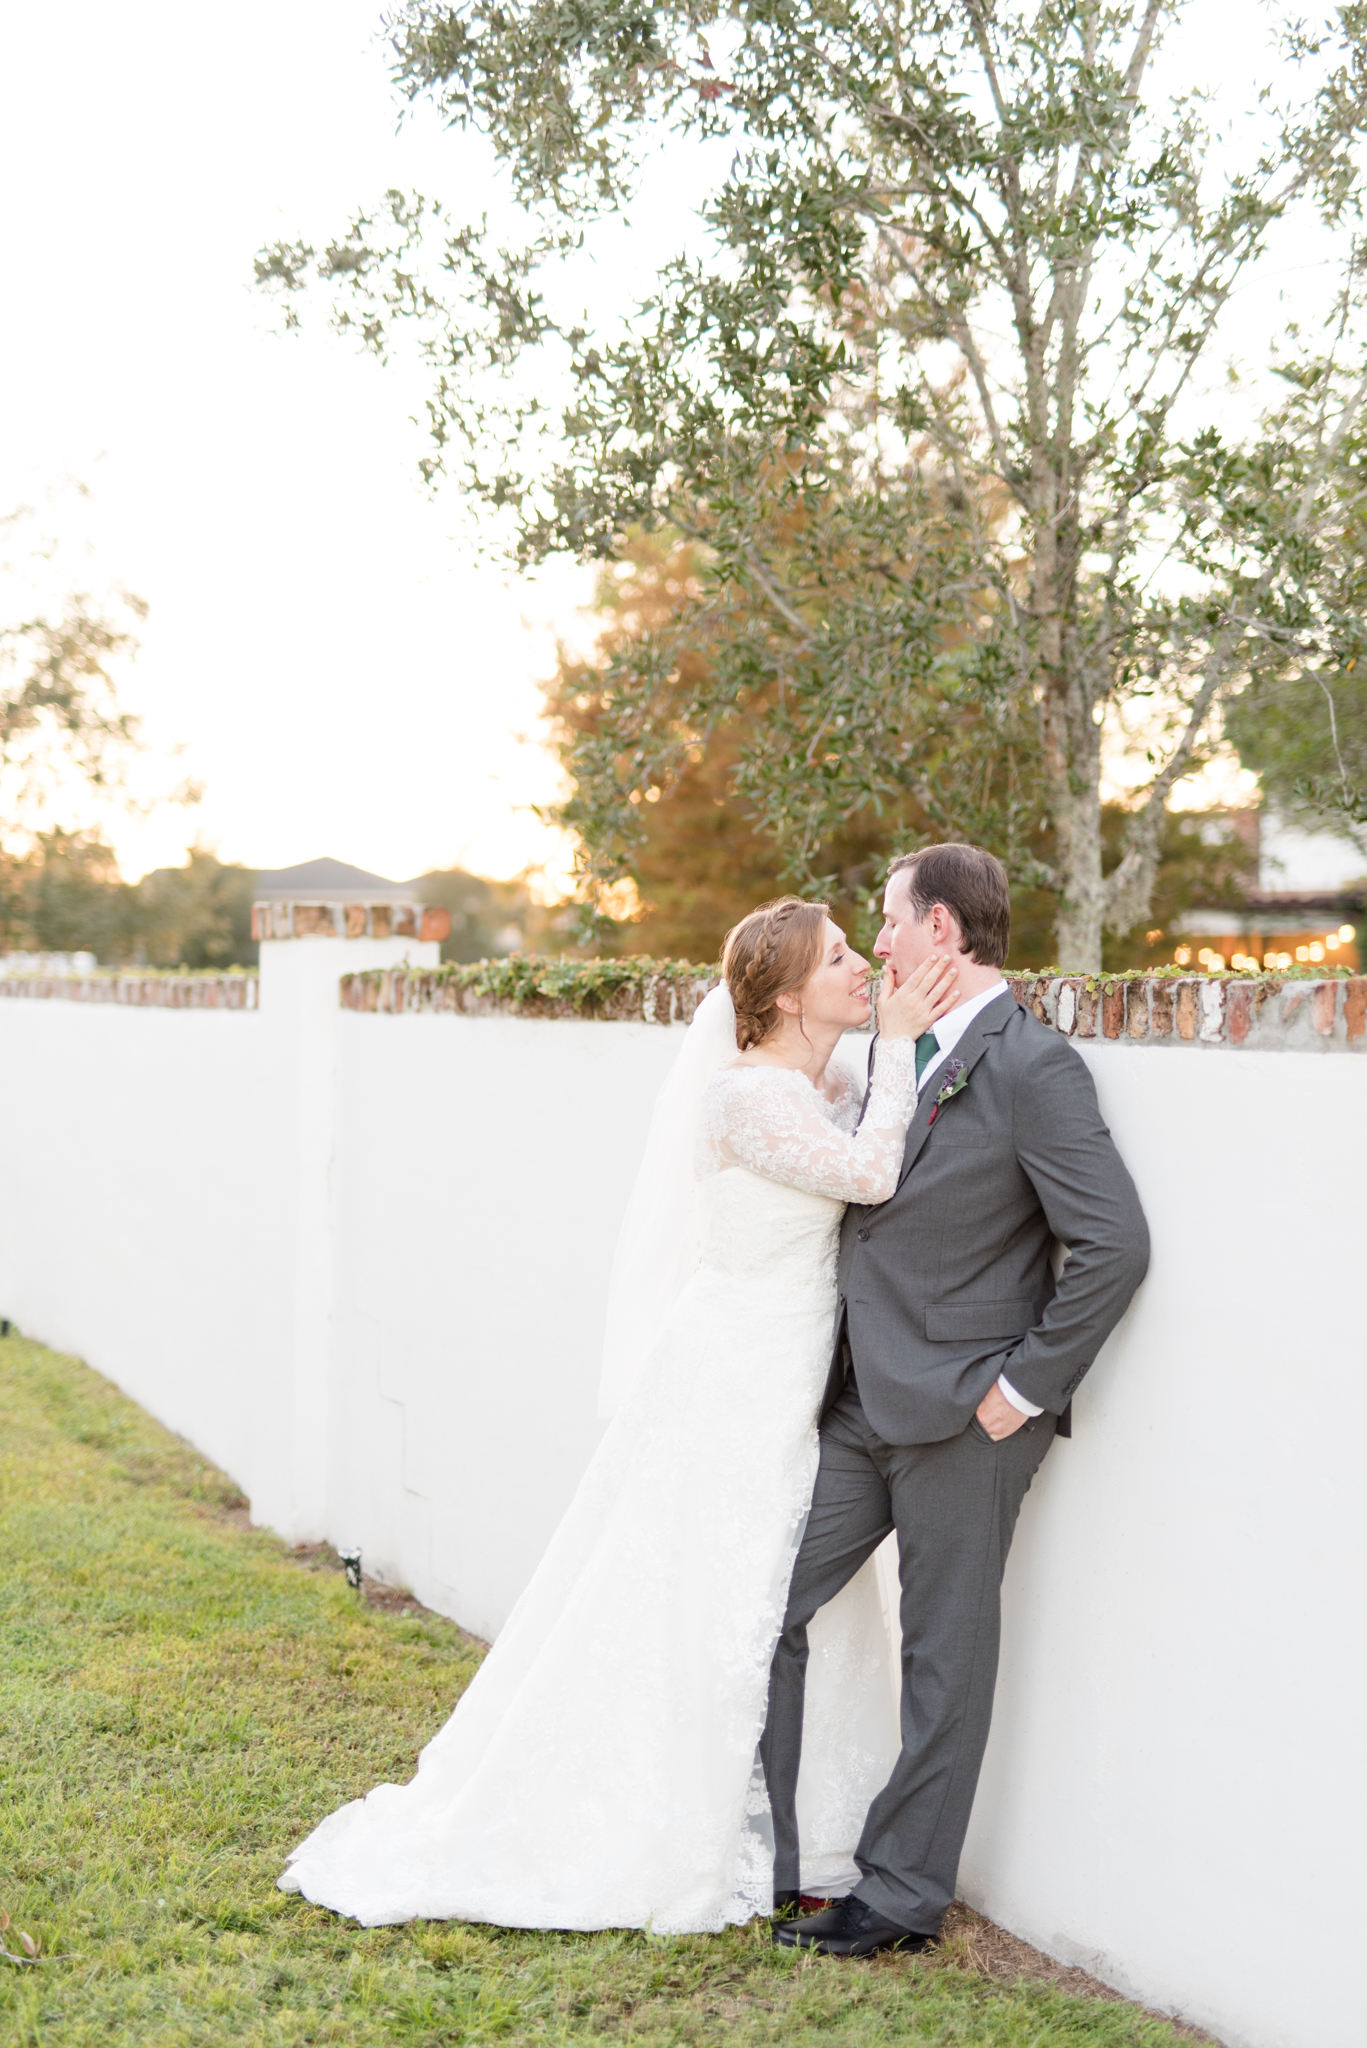 Bride and groom lean up against white brick wall.